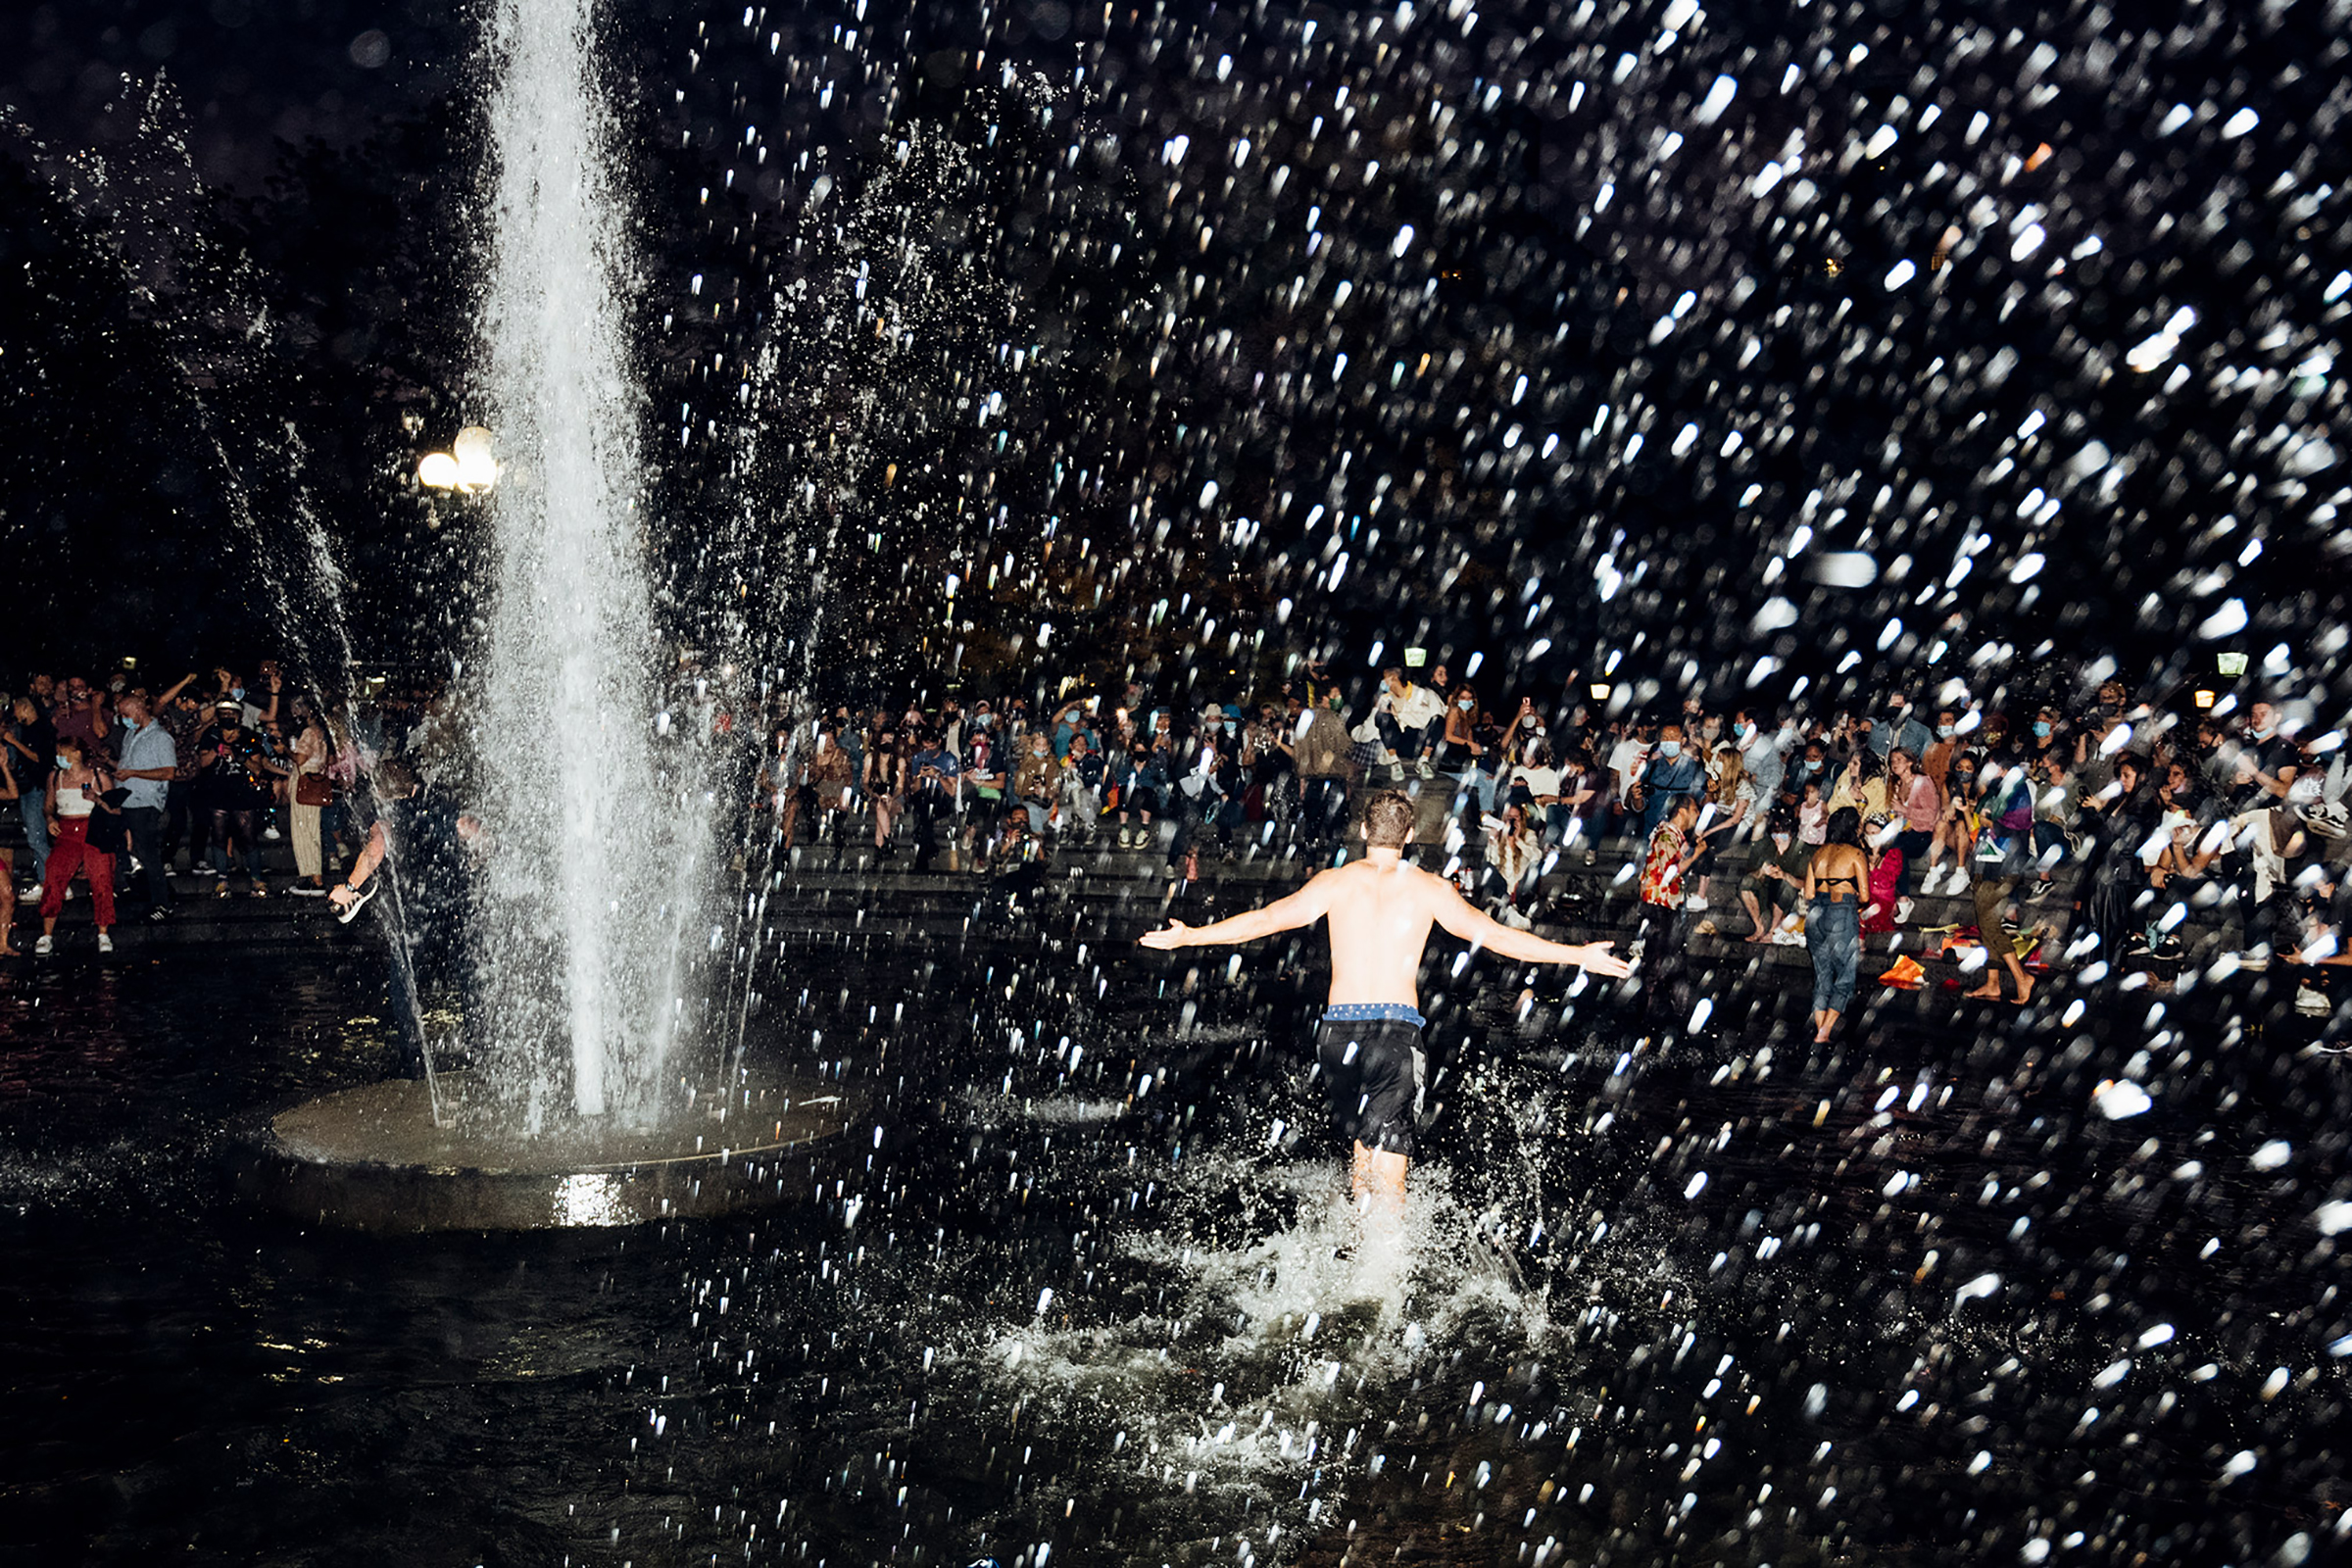 A man runs through the fountain in Washington Square Park in New York City on Nov. 7, after Joe Biden was declared the winner of the 2020 U.S. presidential election. (Malike Sidibe for TIME)